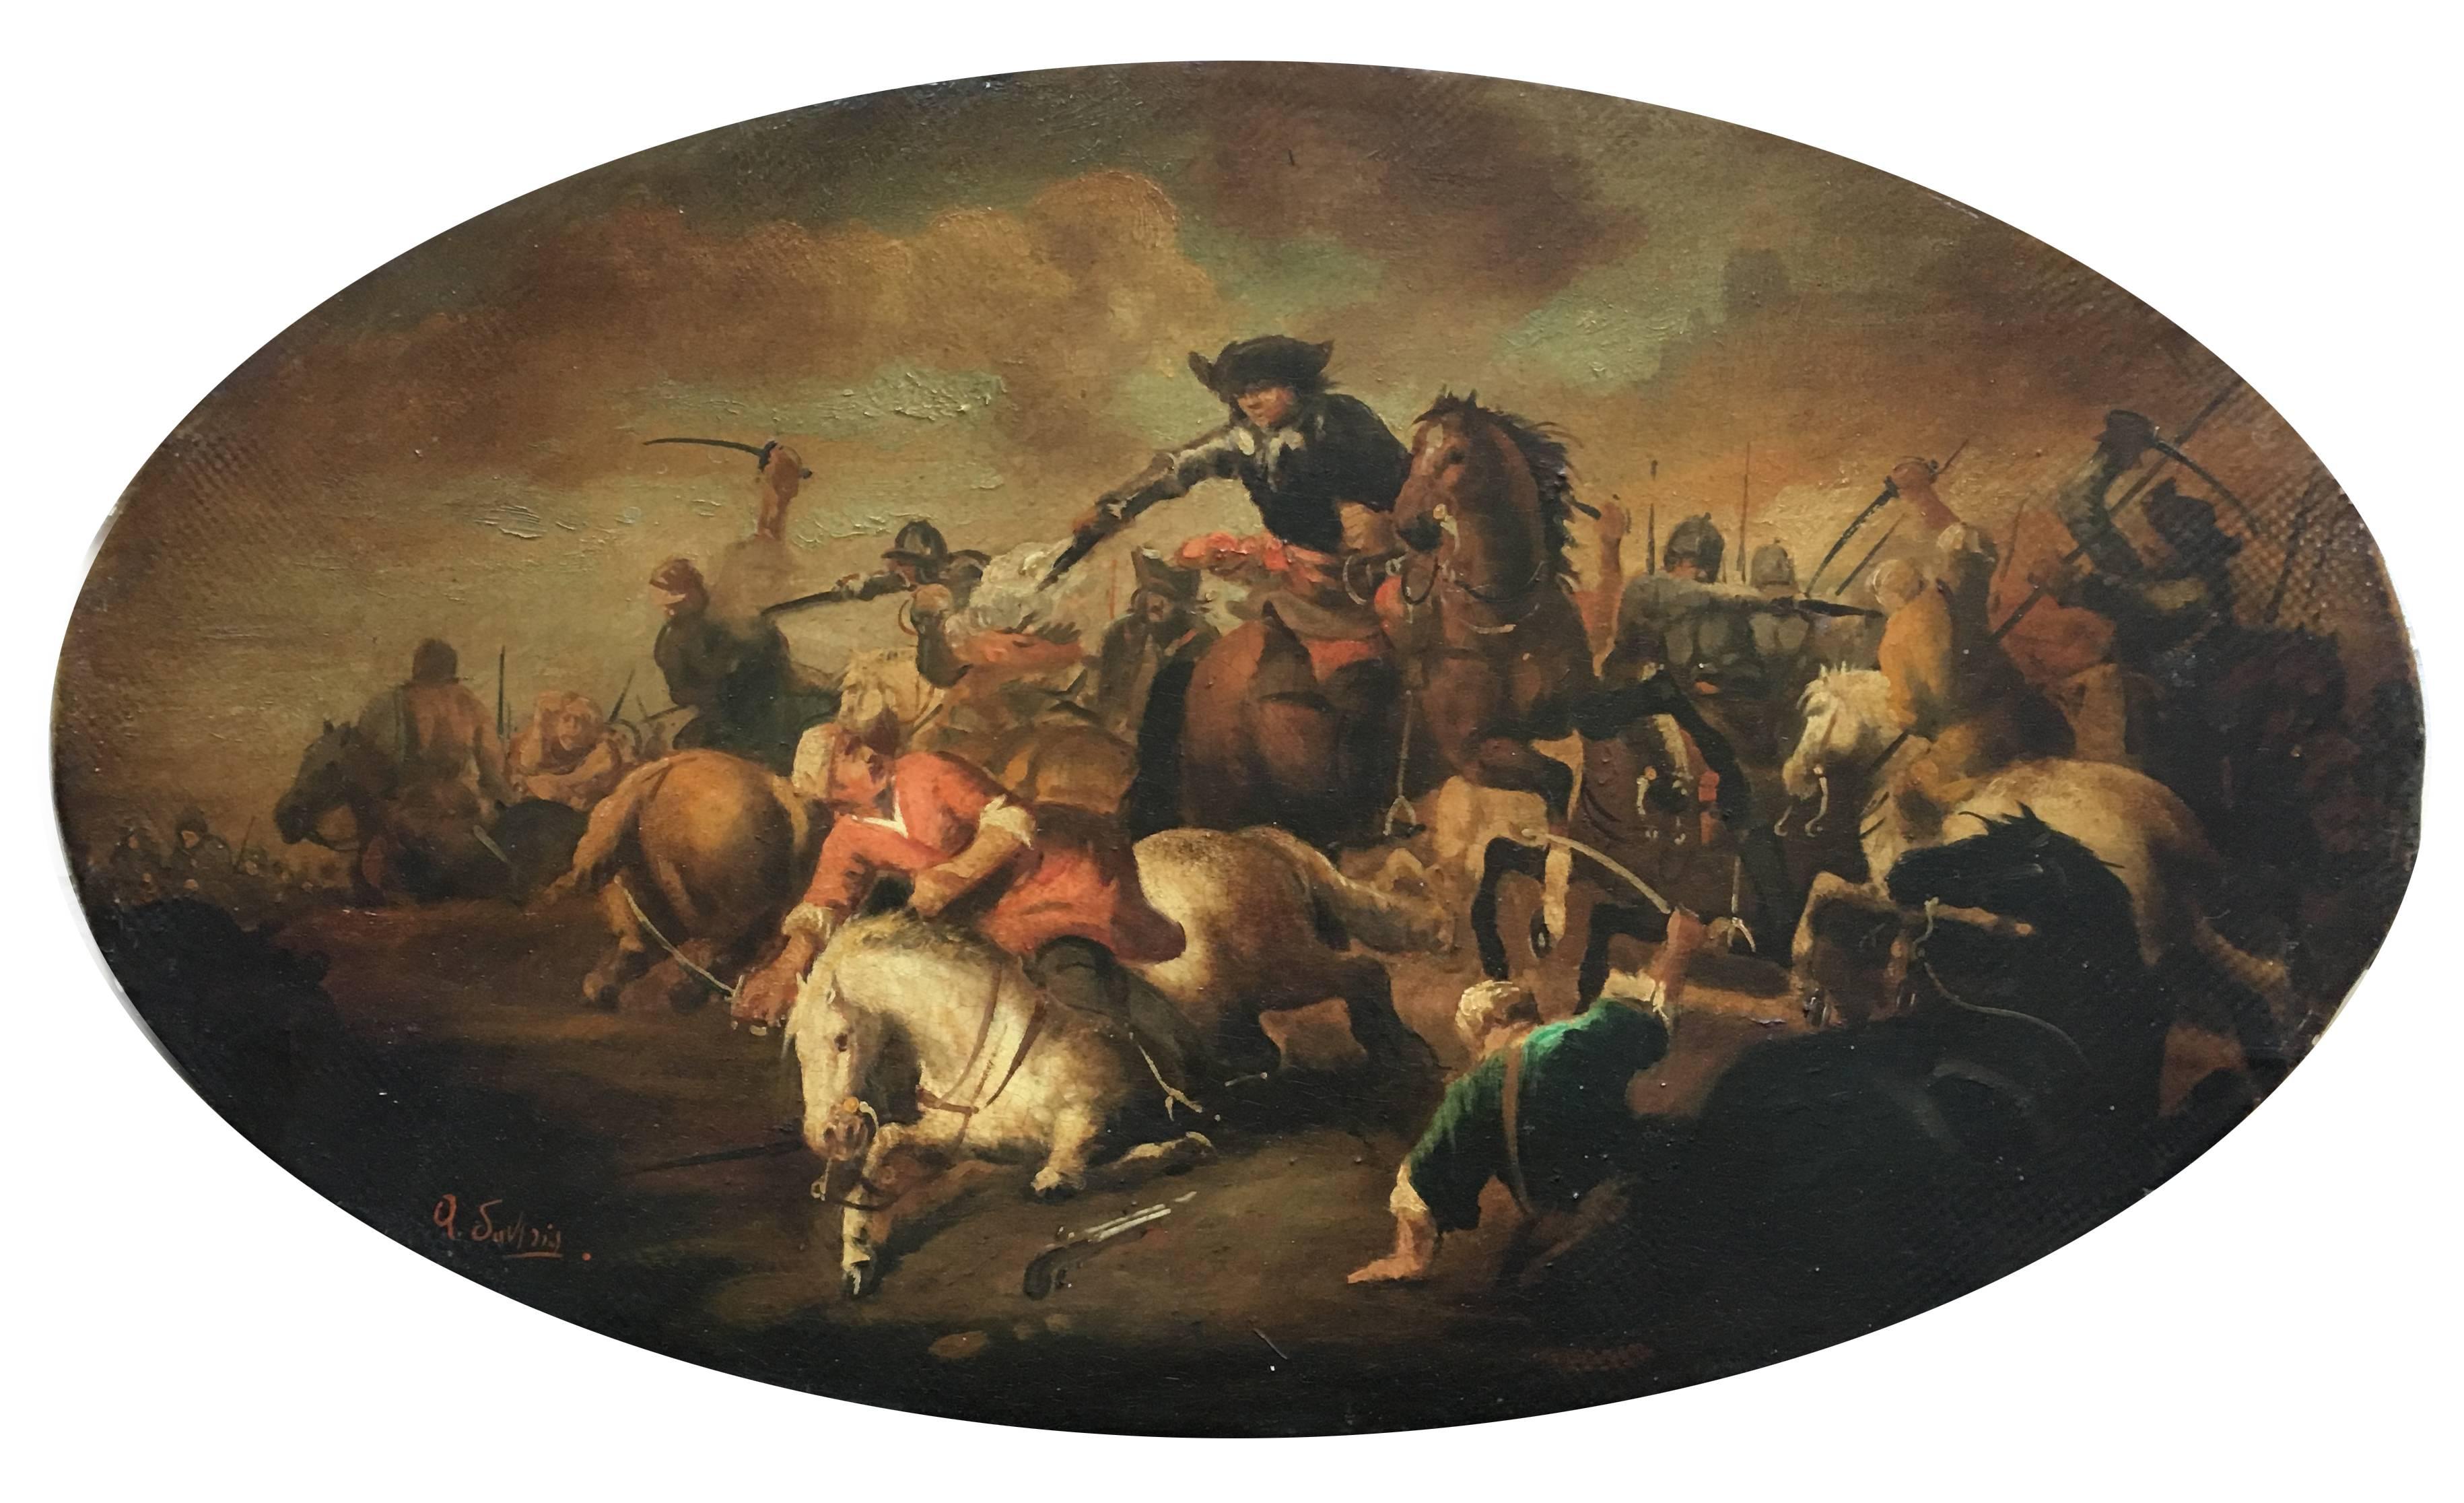 CAVALRY BATTLE - Oil on oval canvas cm.30x50 by Antonio Savisio, Italy 2005
Maestro Antonio Savisio drew inspiration from the masterpieces of the great Neapolitan Maestro Salvator Rosa who was the author of great war and cavalry scenes, so much so